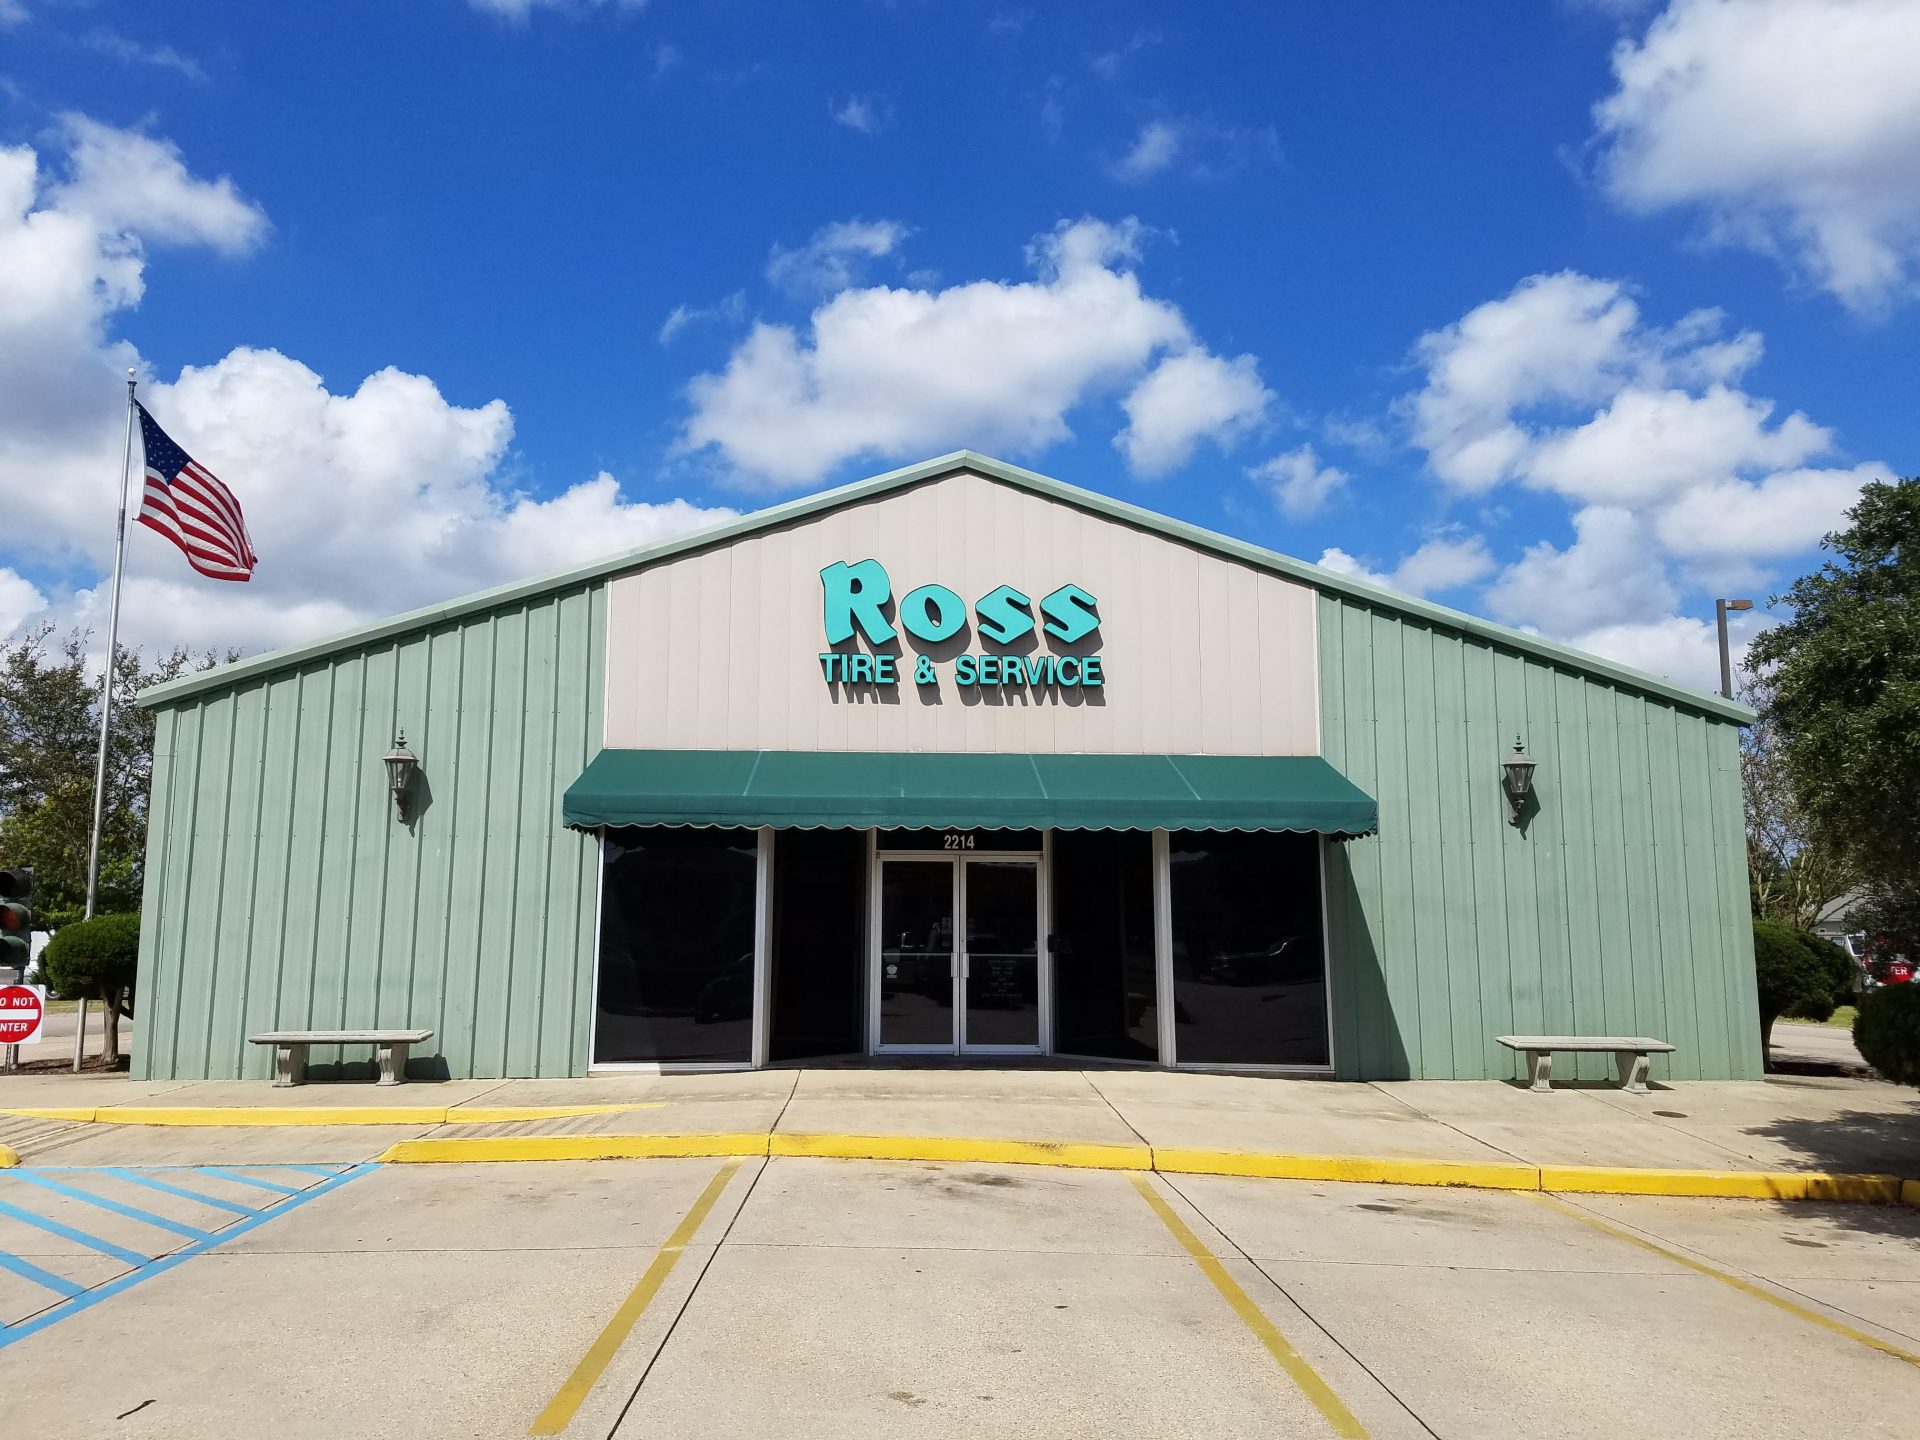 Ross Tire & Service – We are so much more than a tire shop